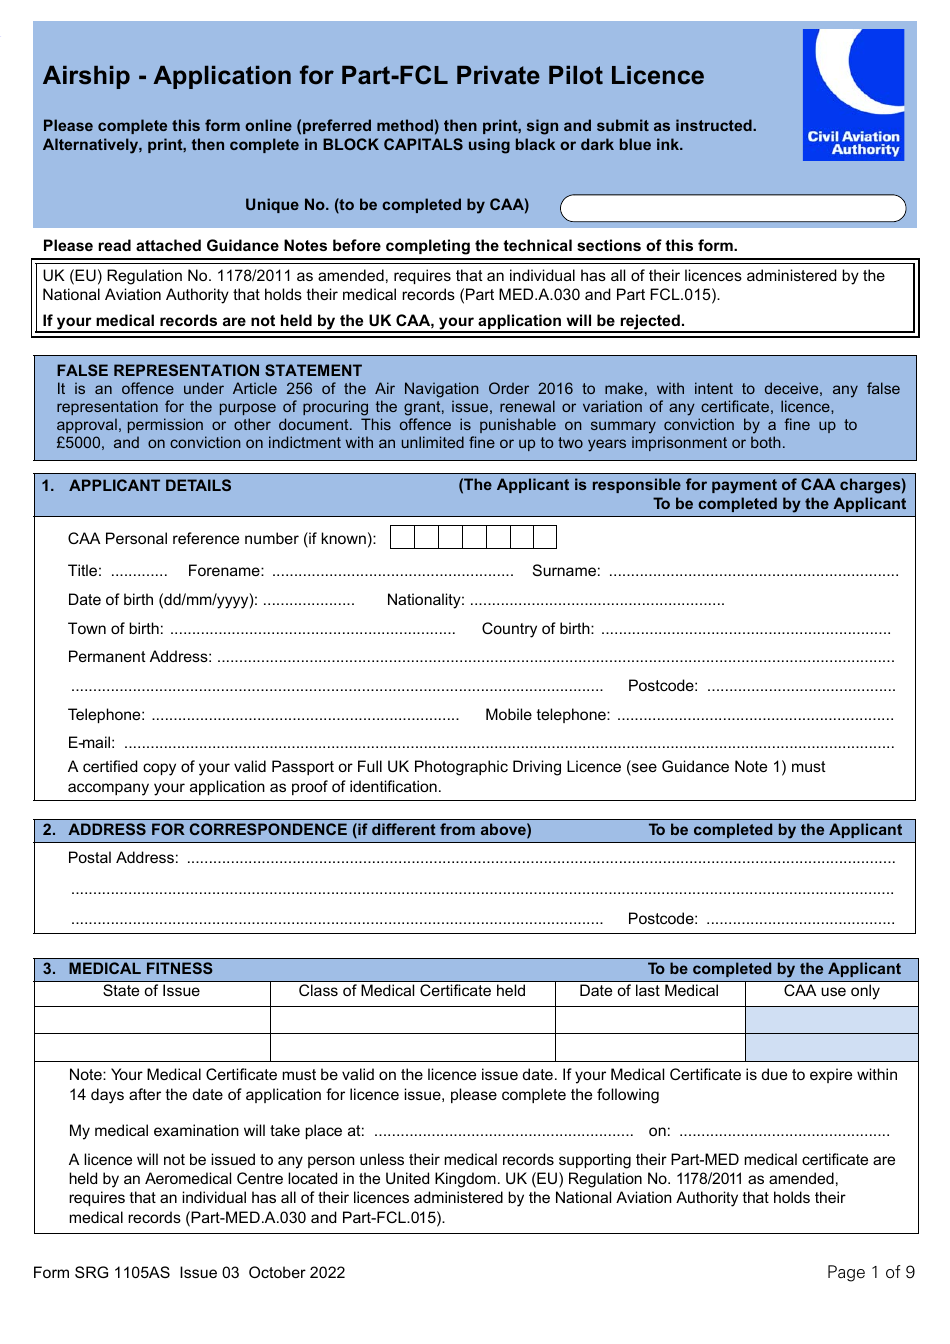 Form SRG1105AS Airship - Application for Part-Fcl Private Pilot Licence - United Kingdom, Page 1